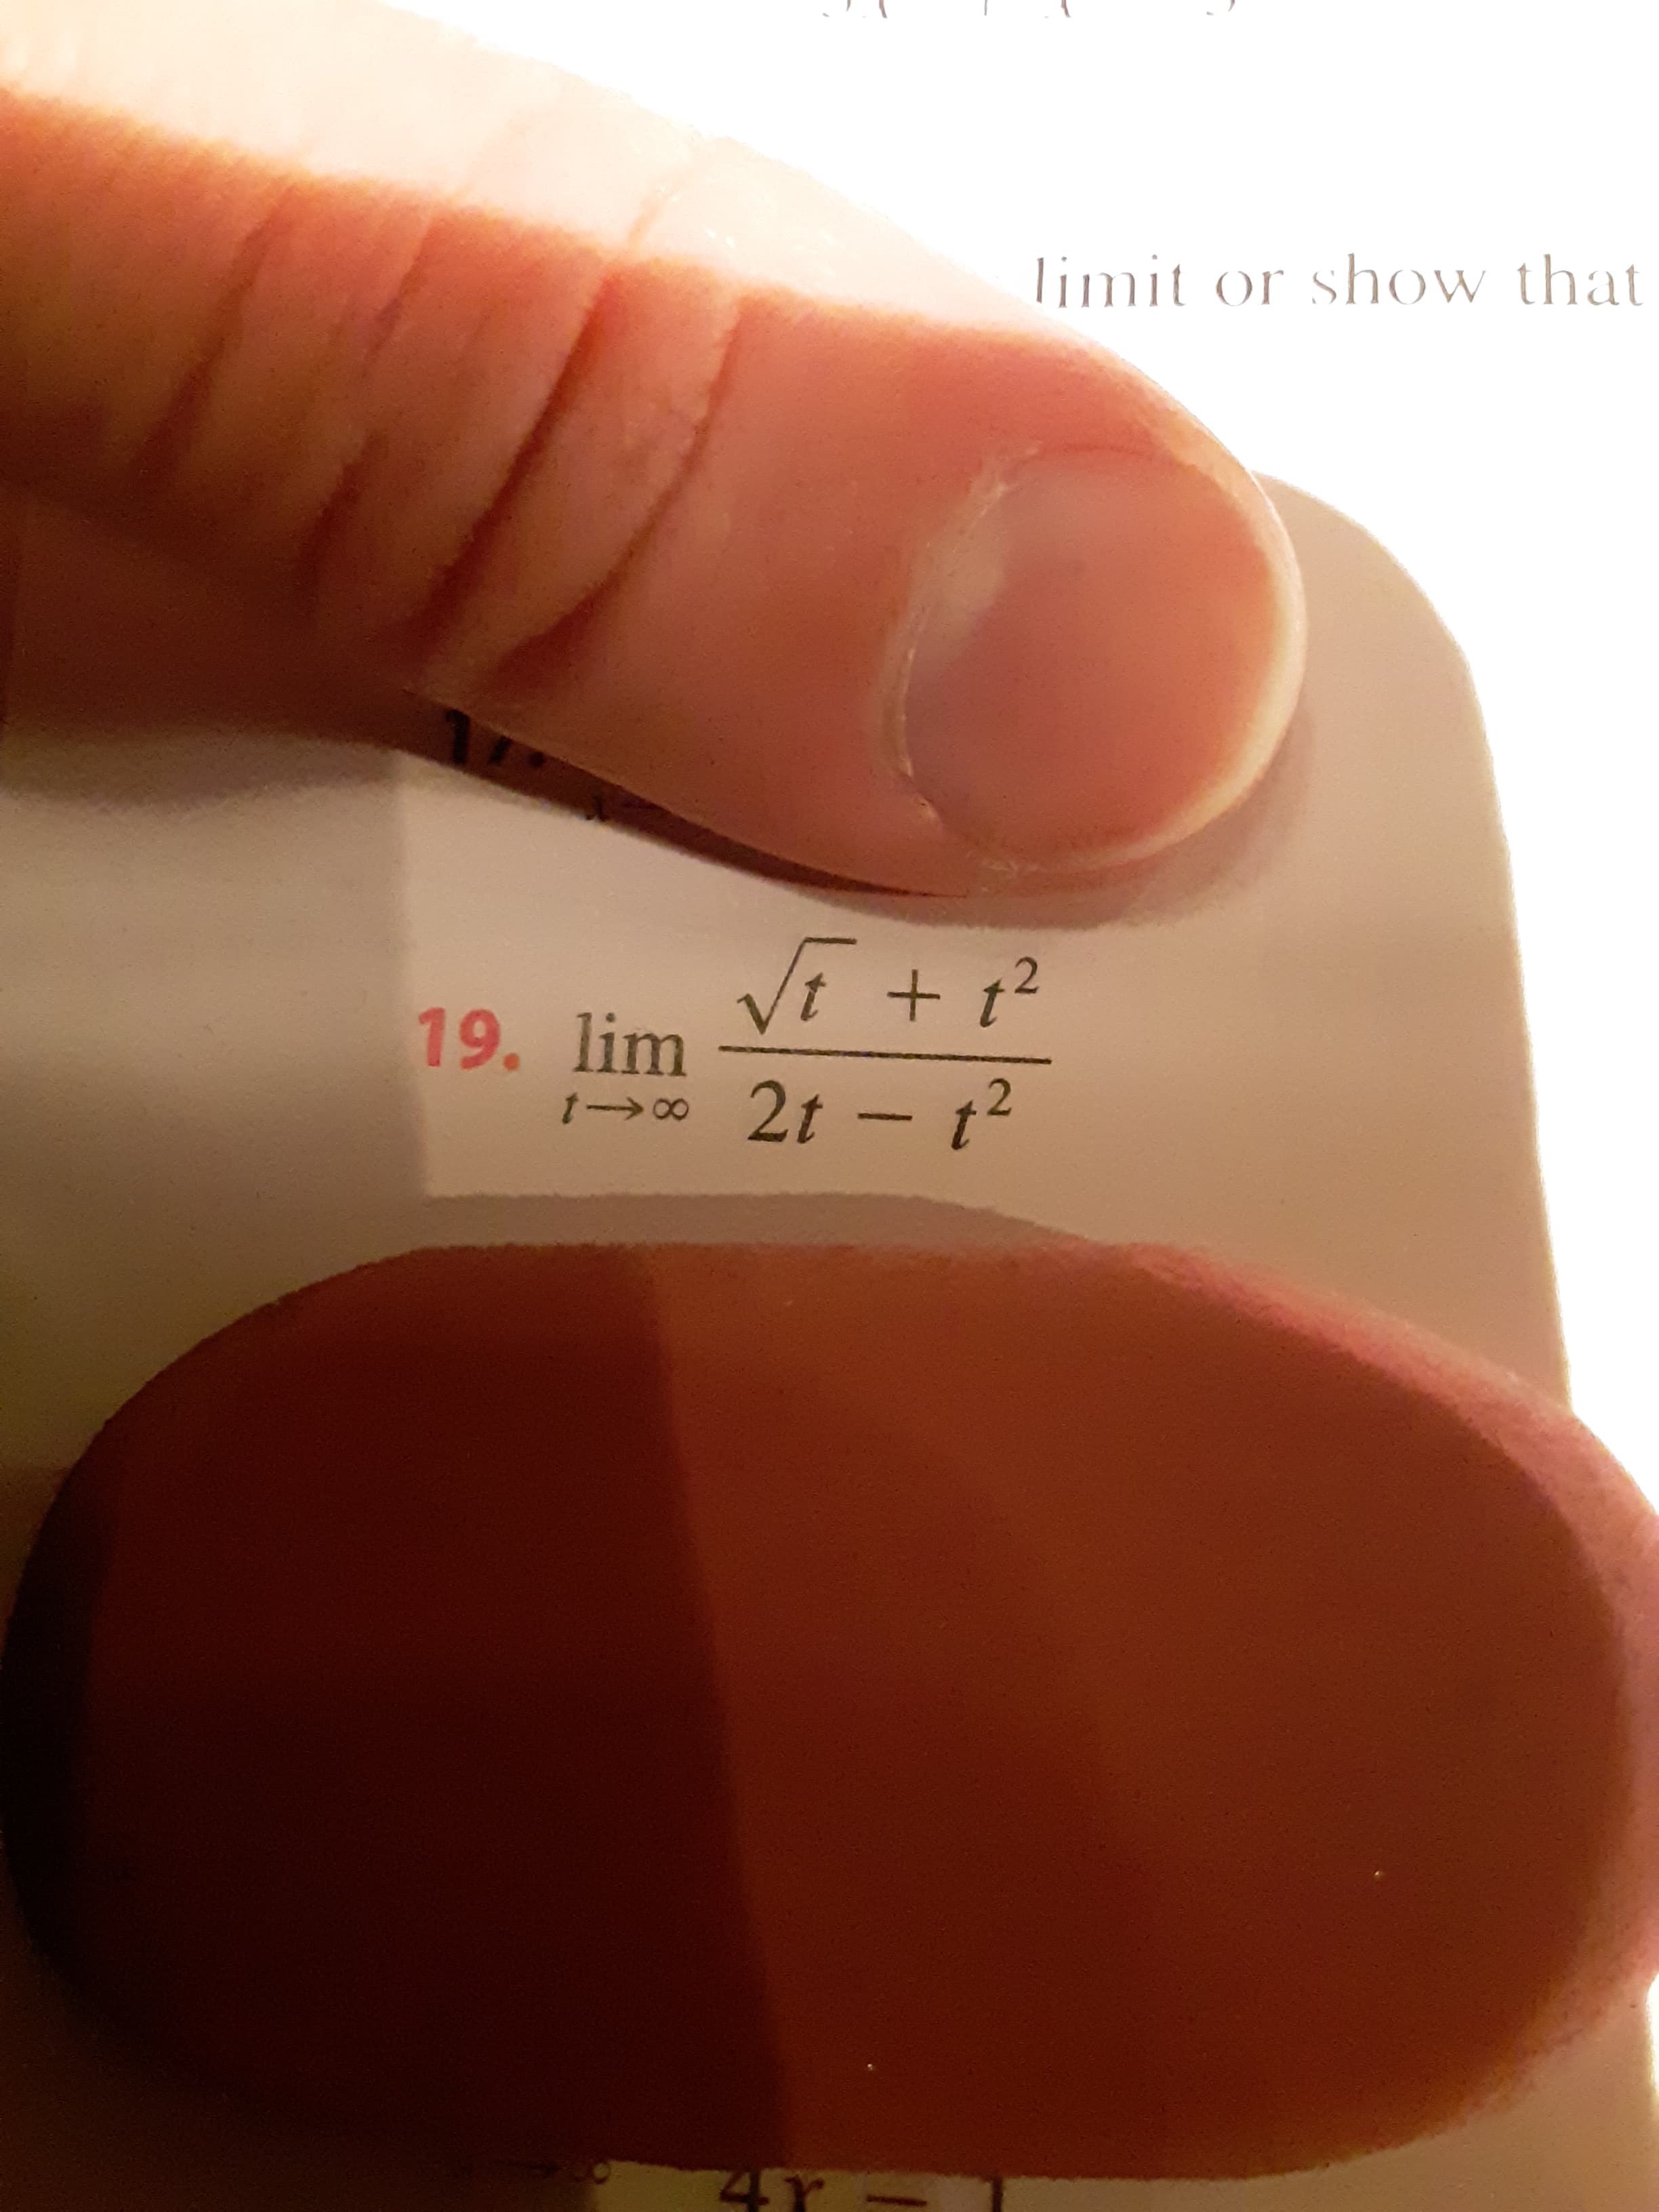 limit or show that
19. lim
2t - 12
